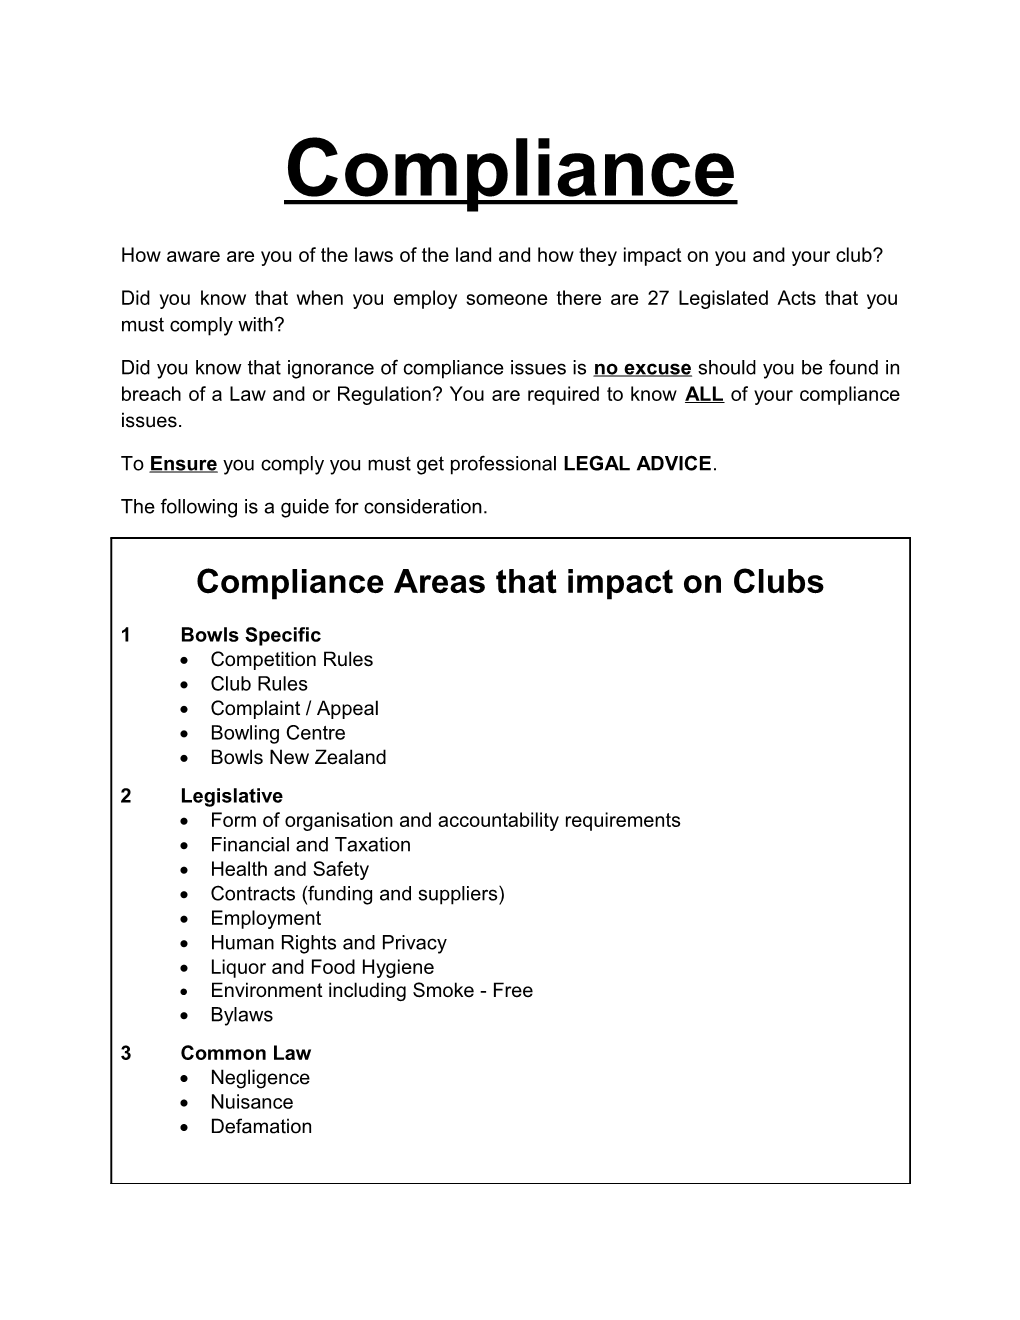 How Aware Are You of the Laws of the Land and How They Impact on You and Your Club?